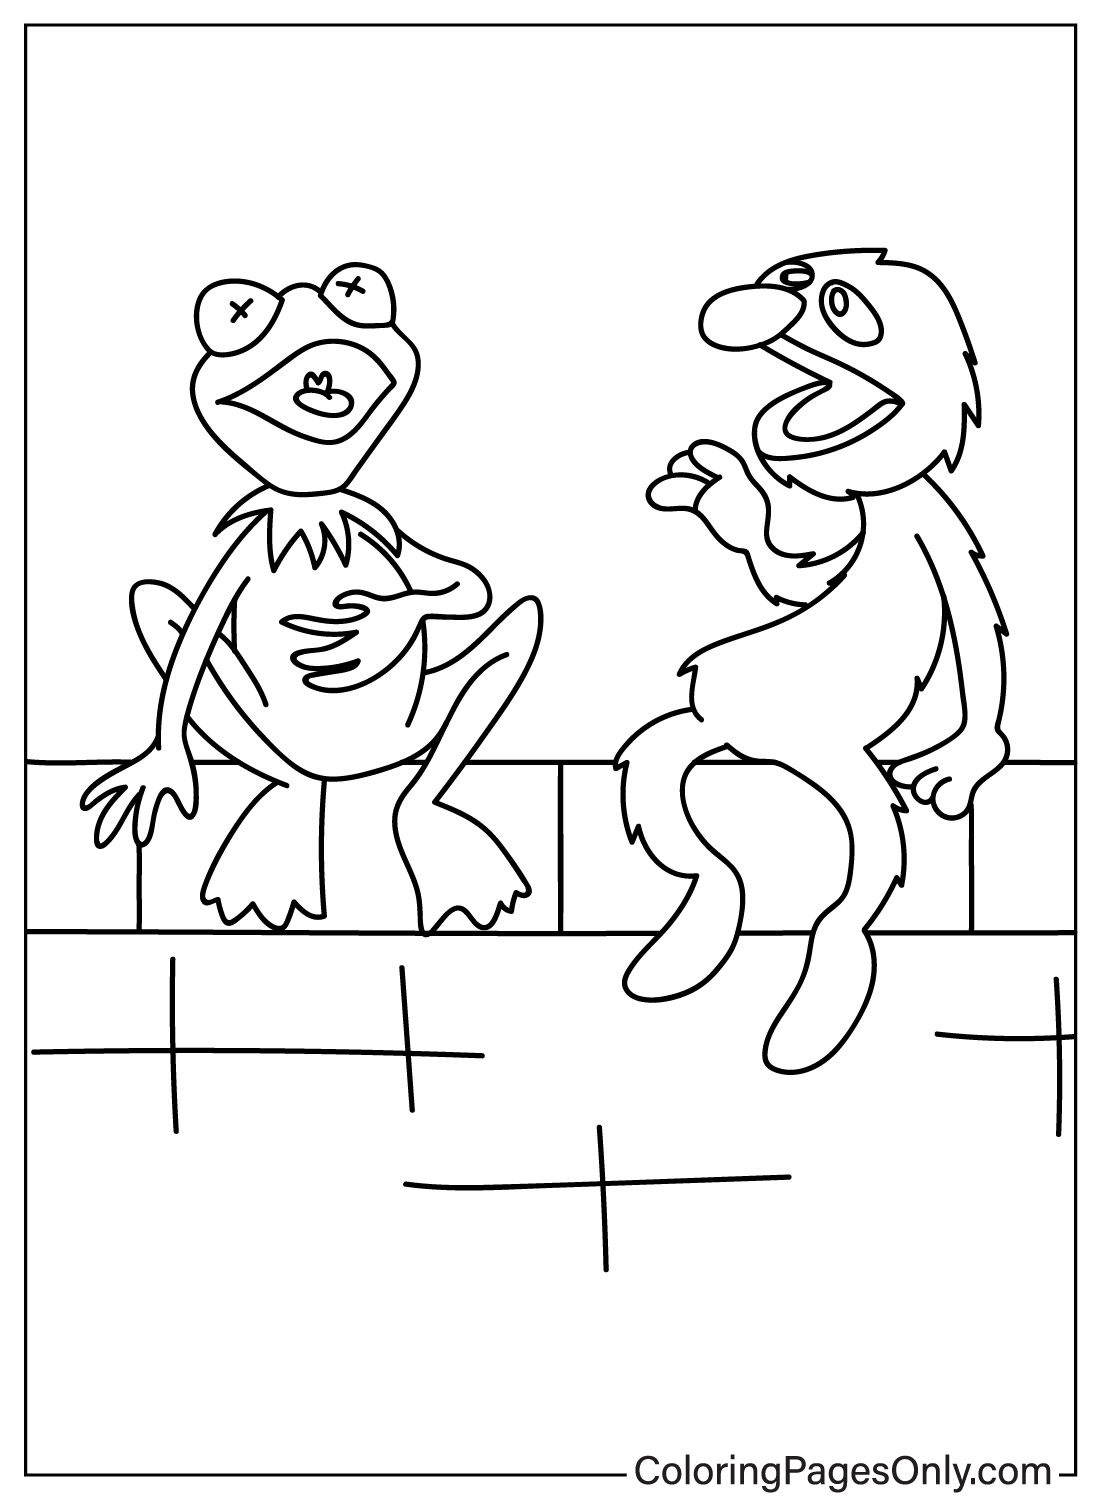 Coloring pages only on x ð grover coloring pagesð httpstcojfaagsw grover cartoon coloringpagesonly coloringpages coloringbook art fanart sketch drawing draw coloring usa trend trending trendingnow x httpst